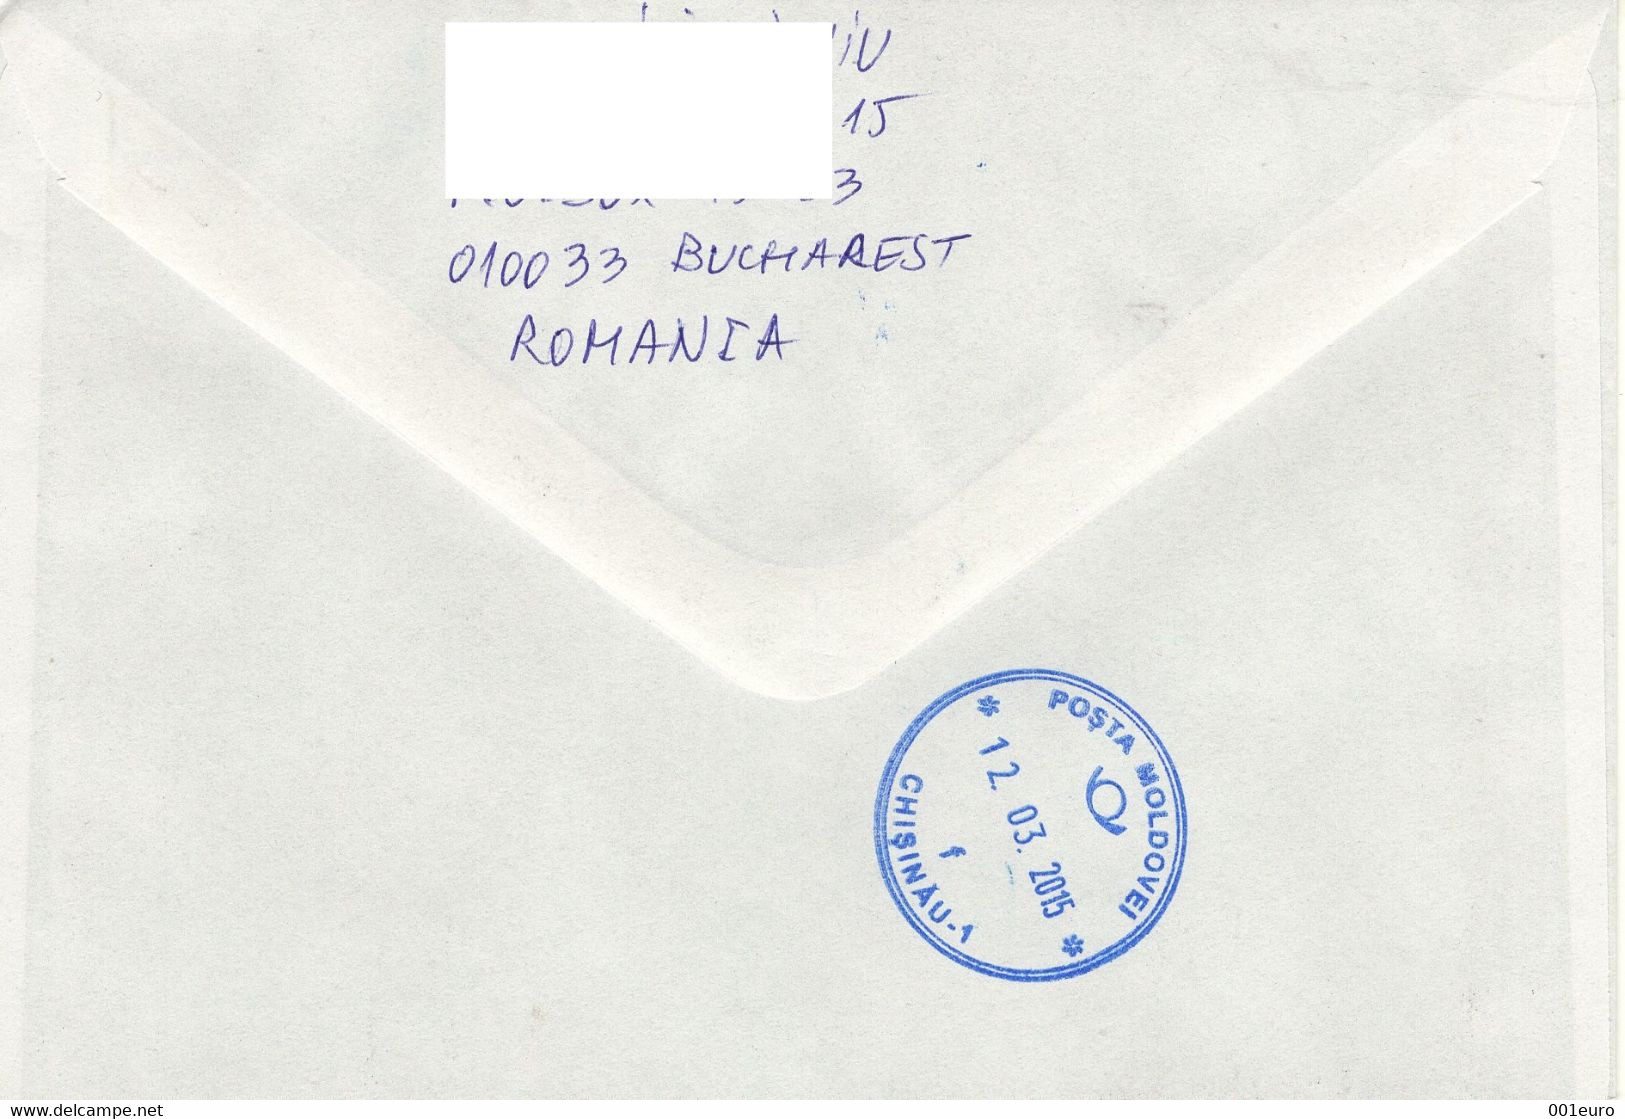 ROMANIA 2010: EUROPA - THE LETTER On REGISTERED Cover Circulated To Moldova Republic - Registered Shipping! - Lettres & Documents